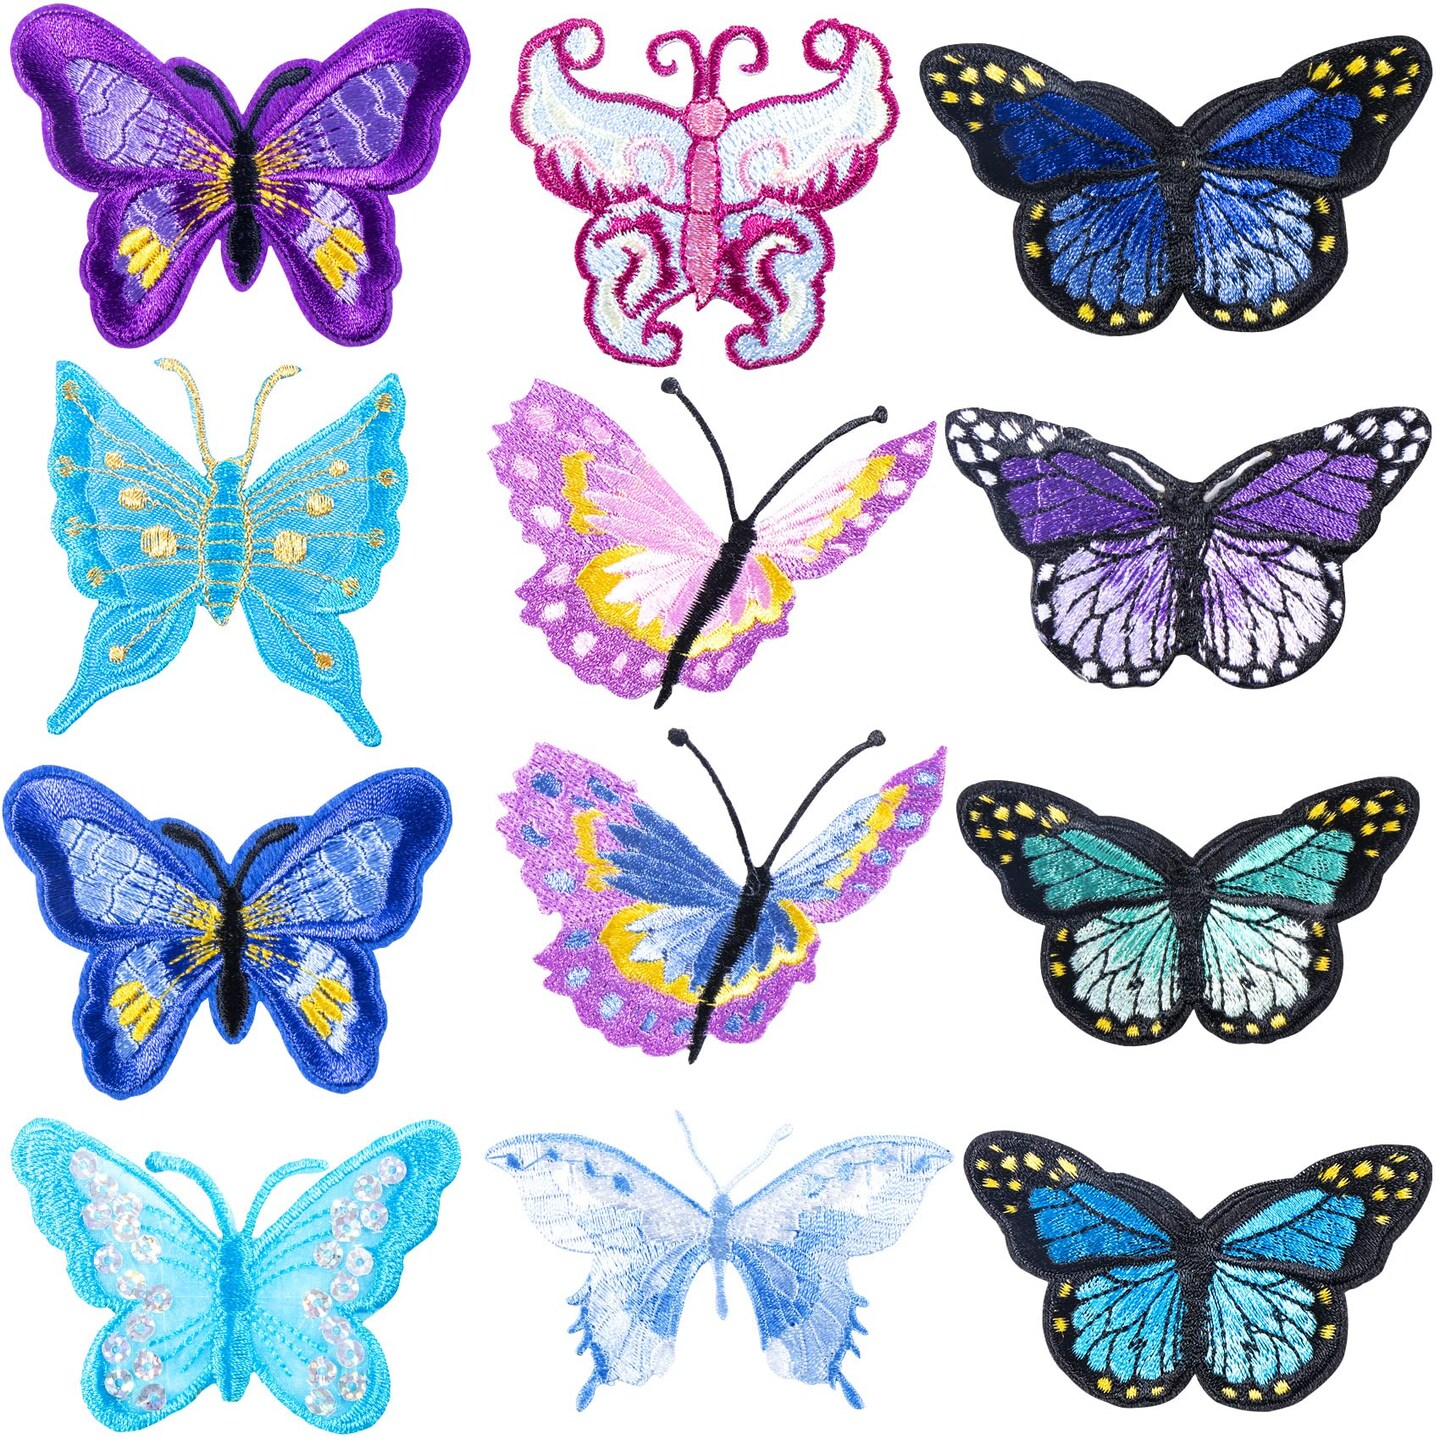 12 PCS Butterfly Patch Sew On, PAGOW Butterfly Embroidered Iron On Patches, Iron Sew On Embroidered Applique Decoration Sewing Patches for Bags, Jacket, Jean, Clothes DIY Patches,12 Bright Color